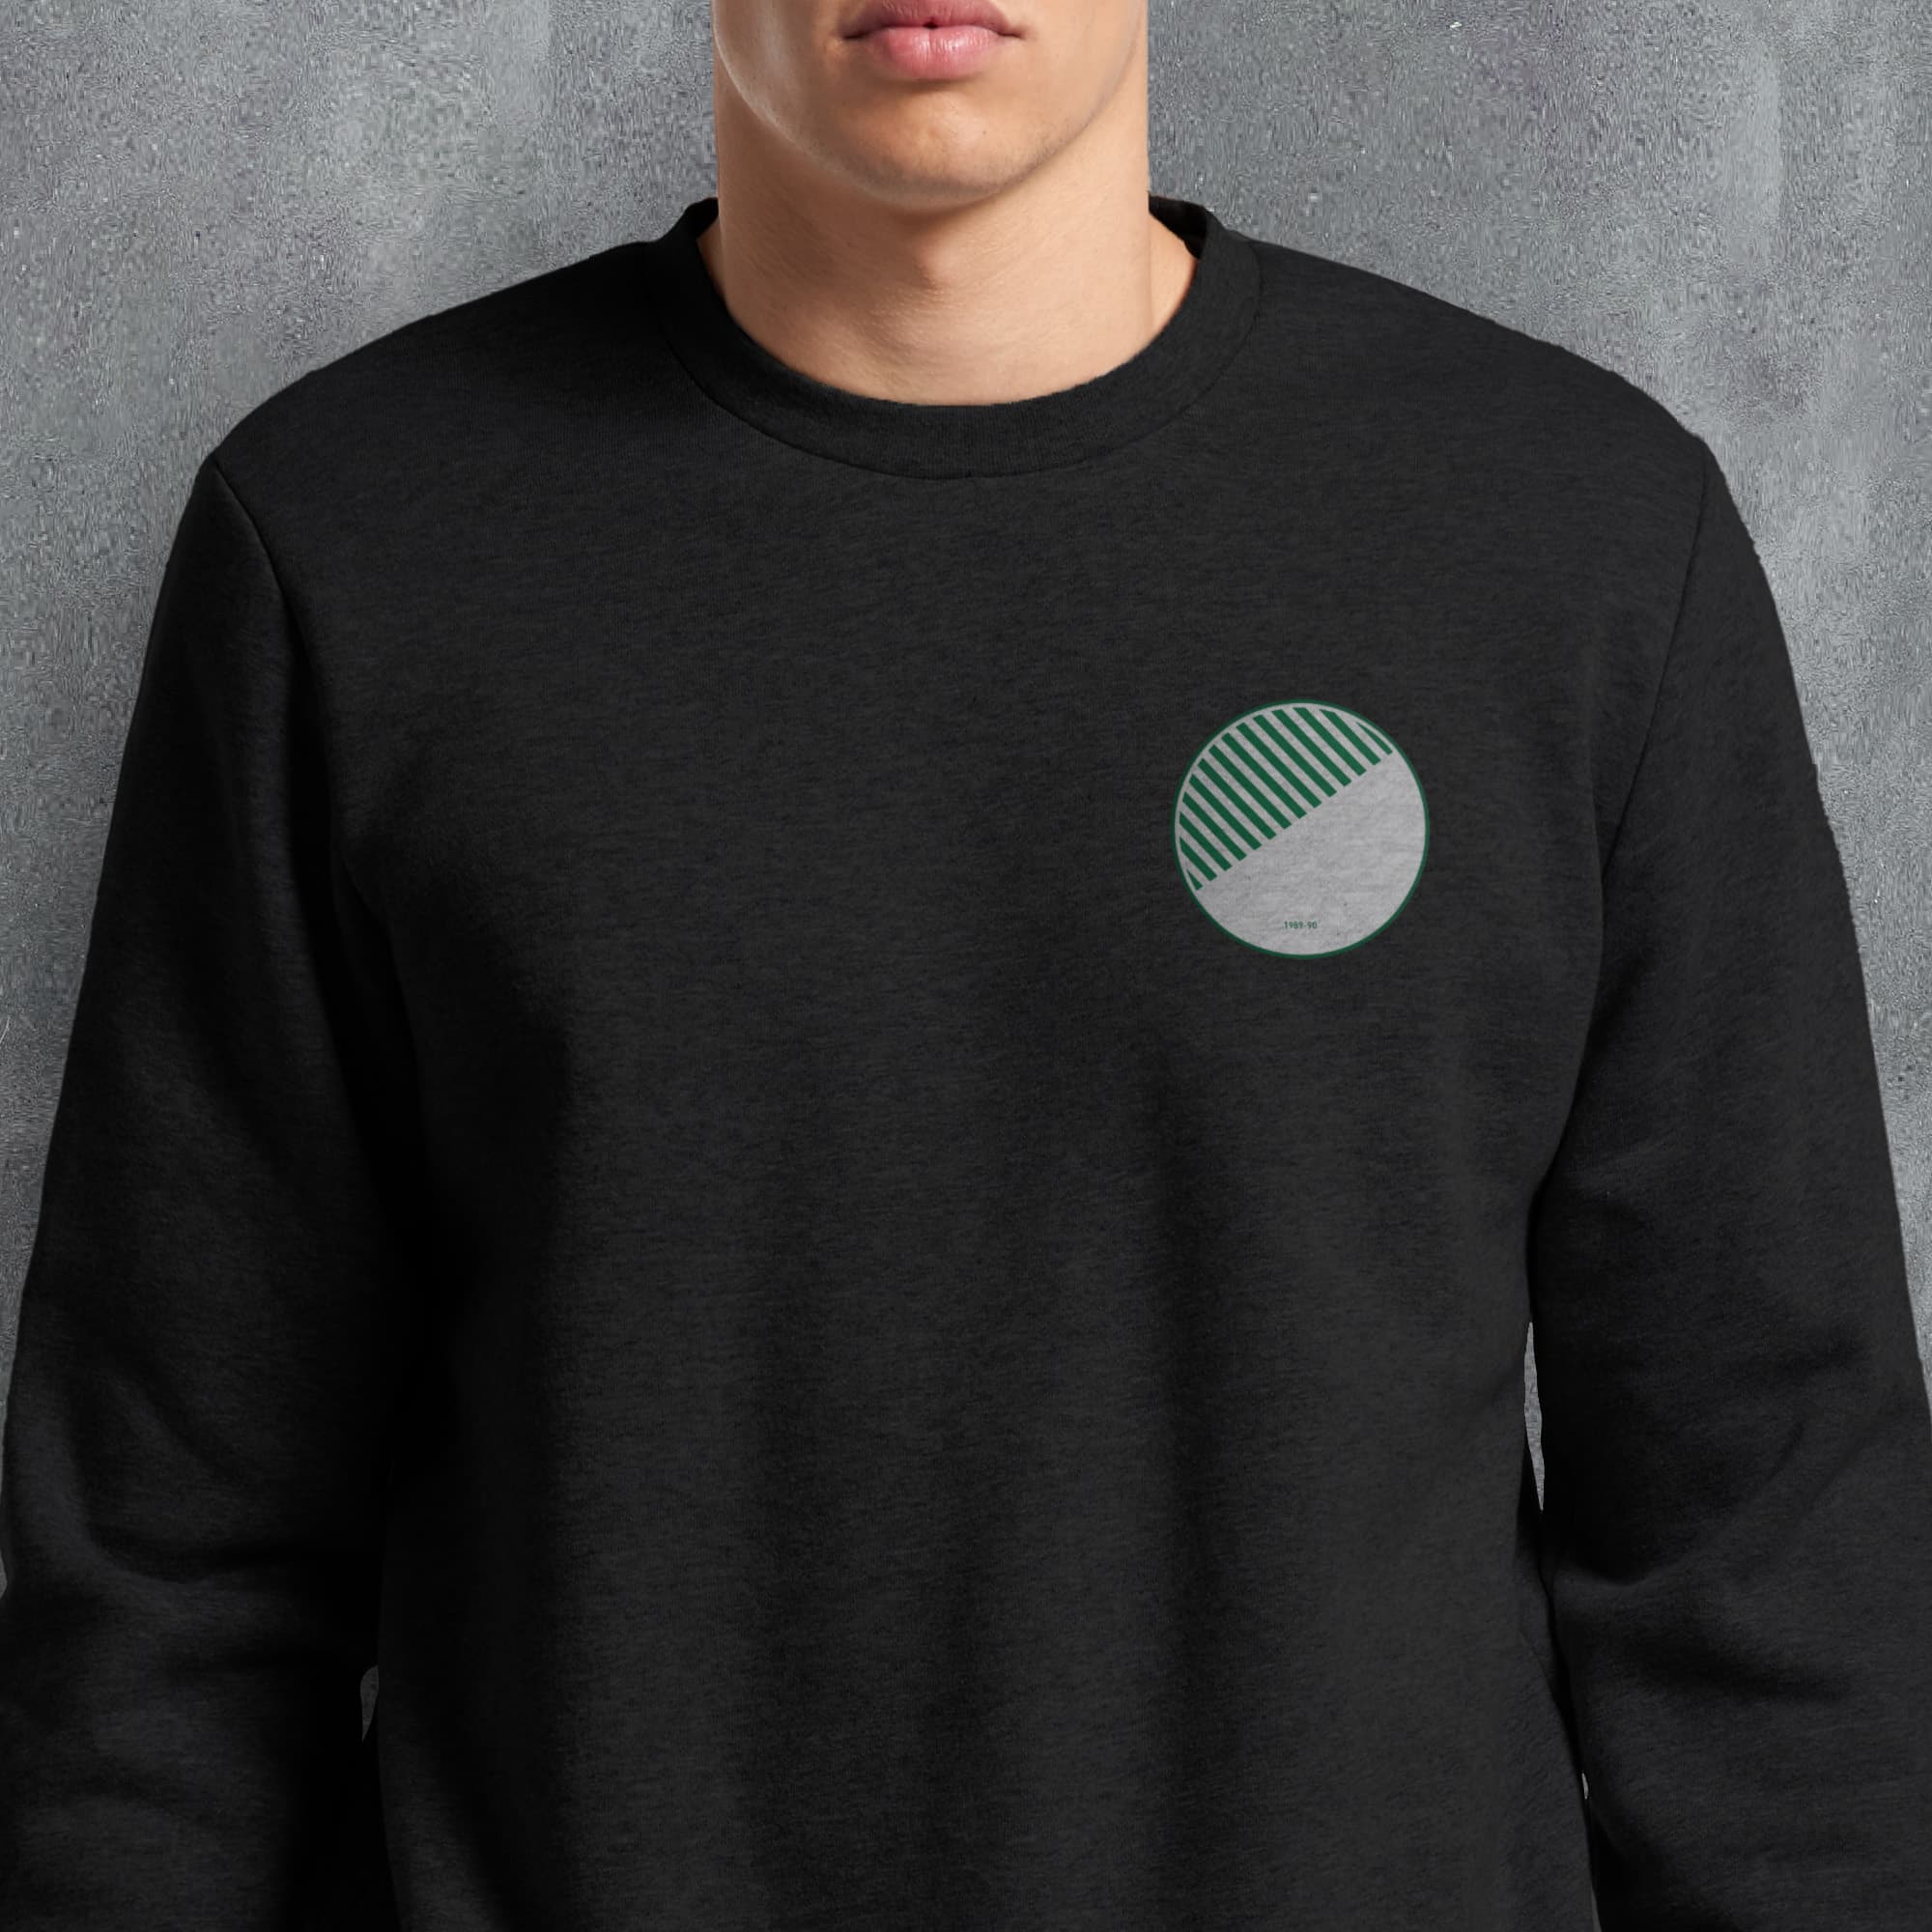 a man wearing a black sweatshirt with a green circle on it